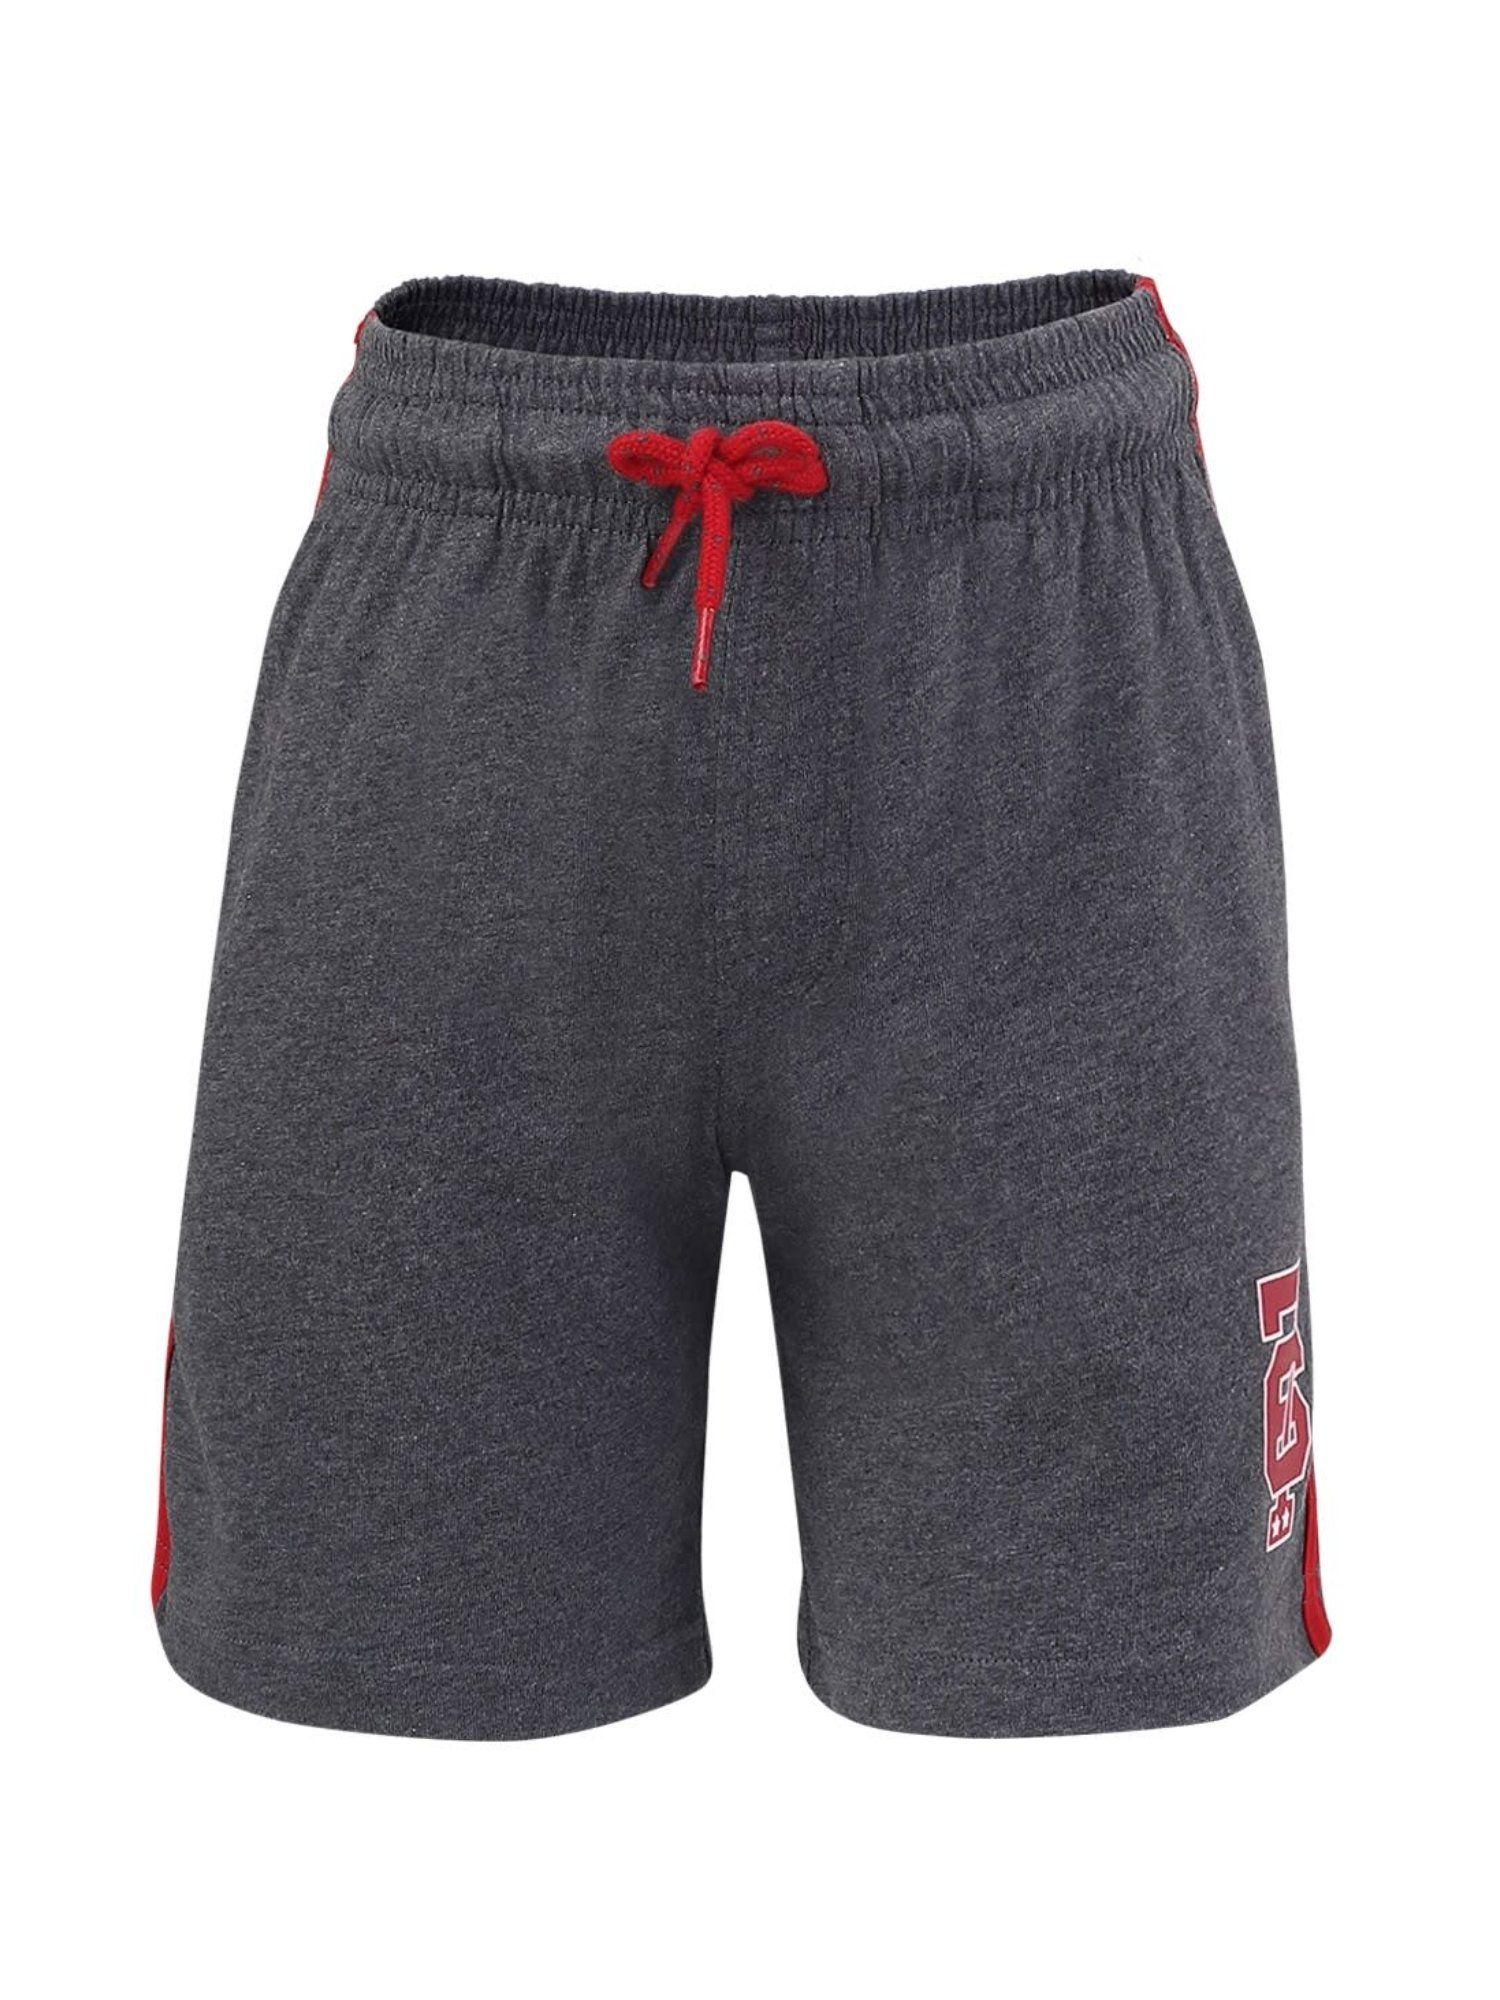 ab11 cotton rich shorts for boys with side pocket & drawstring grey